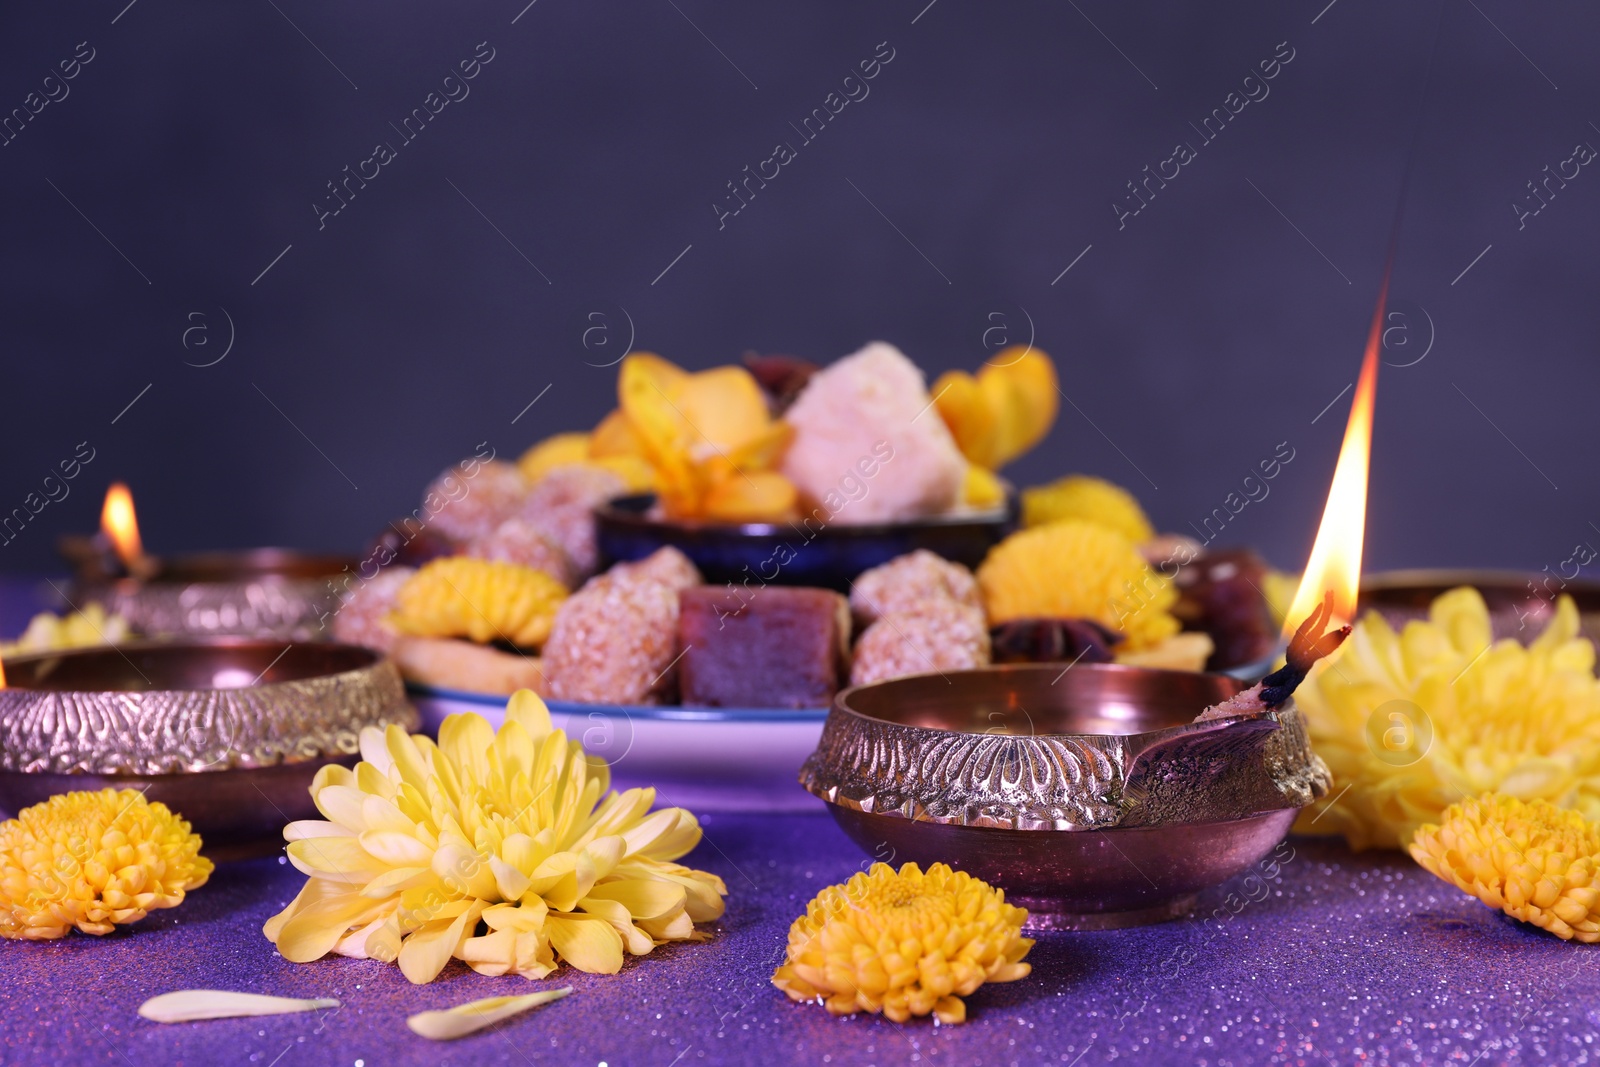 Photo of Diwali celebration. Diya lamps, tasty Indian sweets and chrysanthemum flowers on shiny violet table